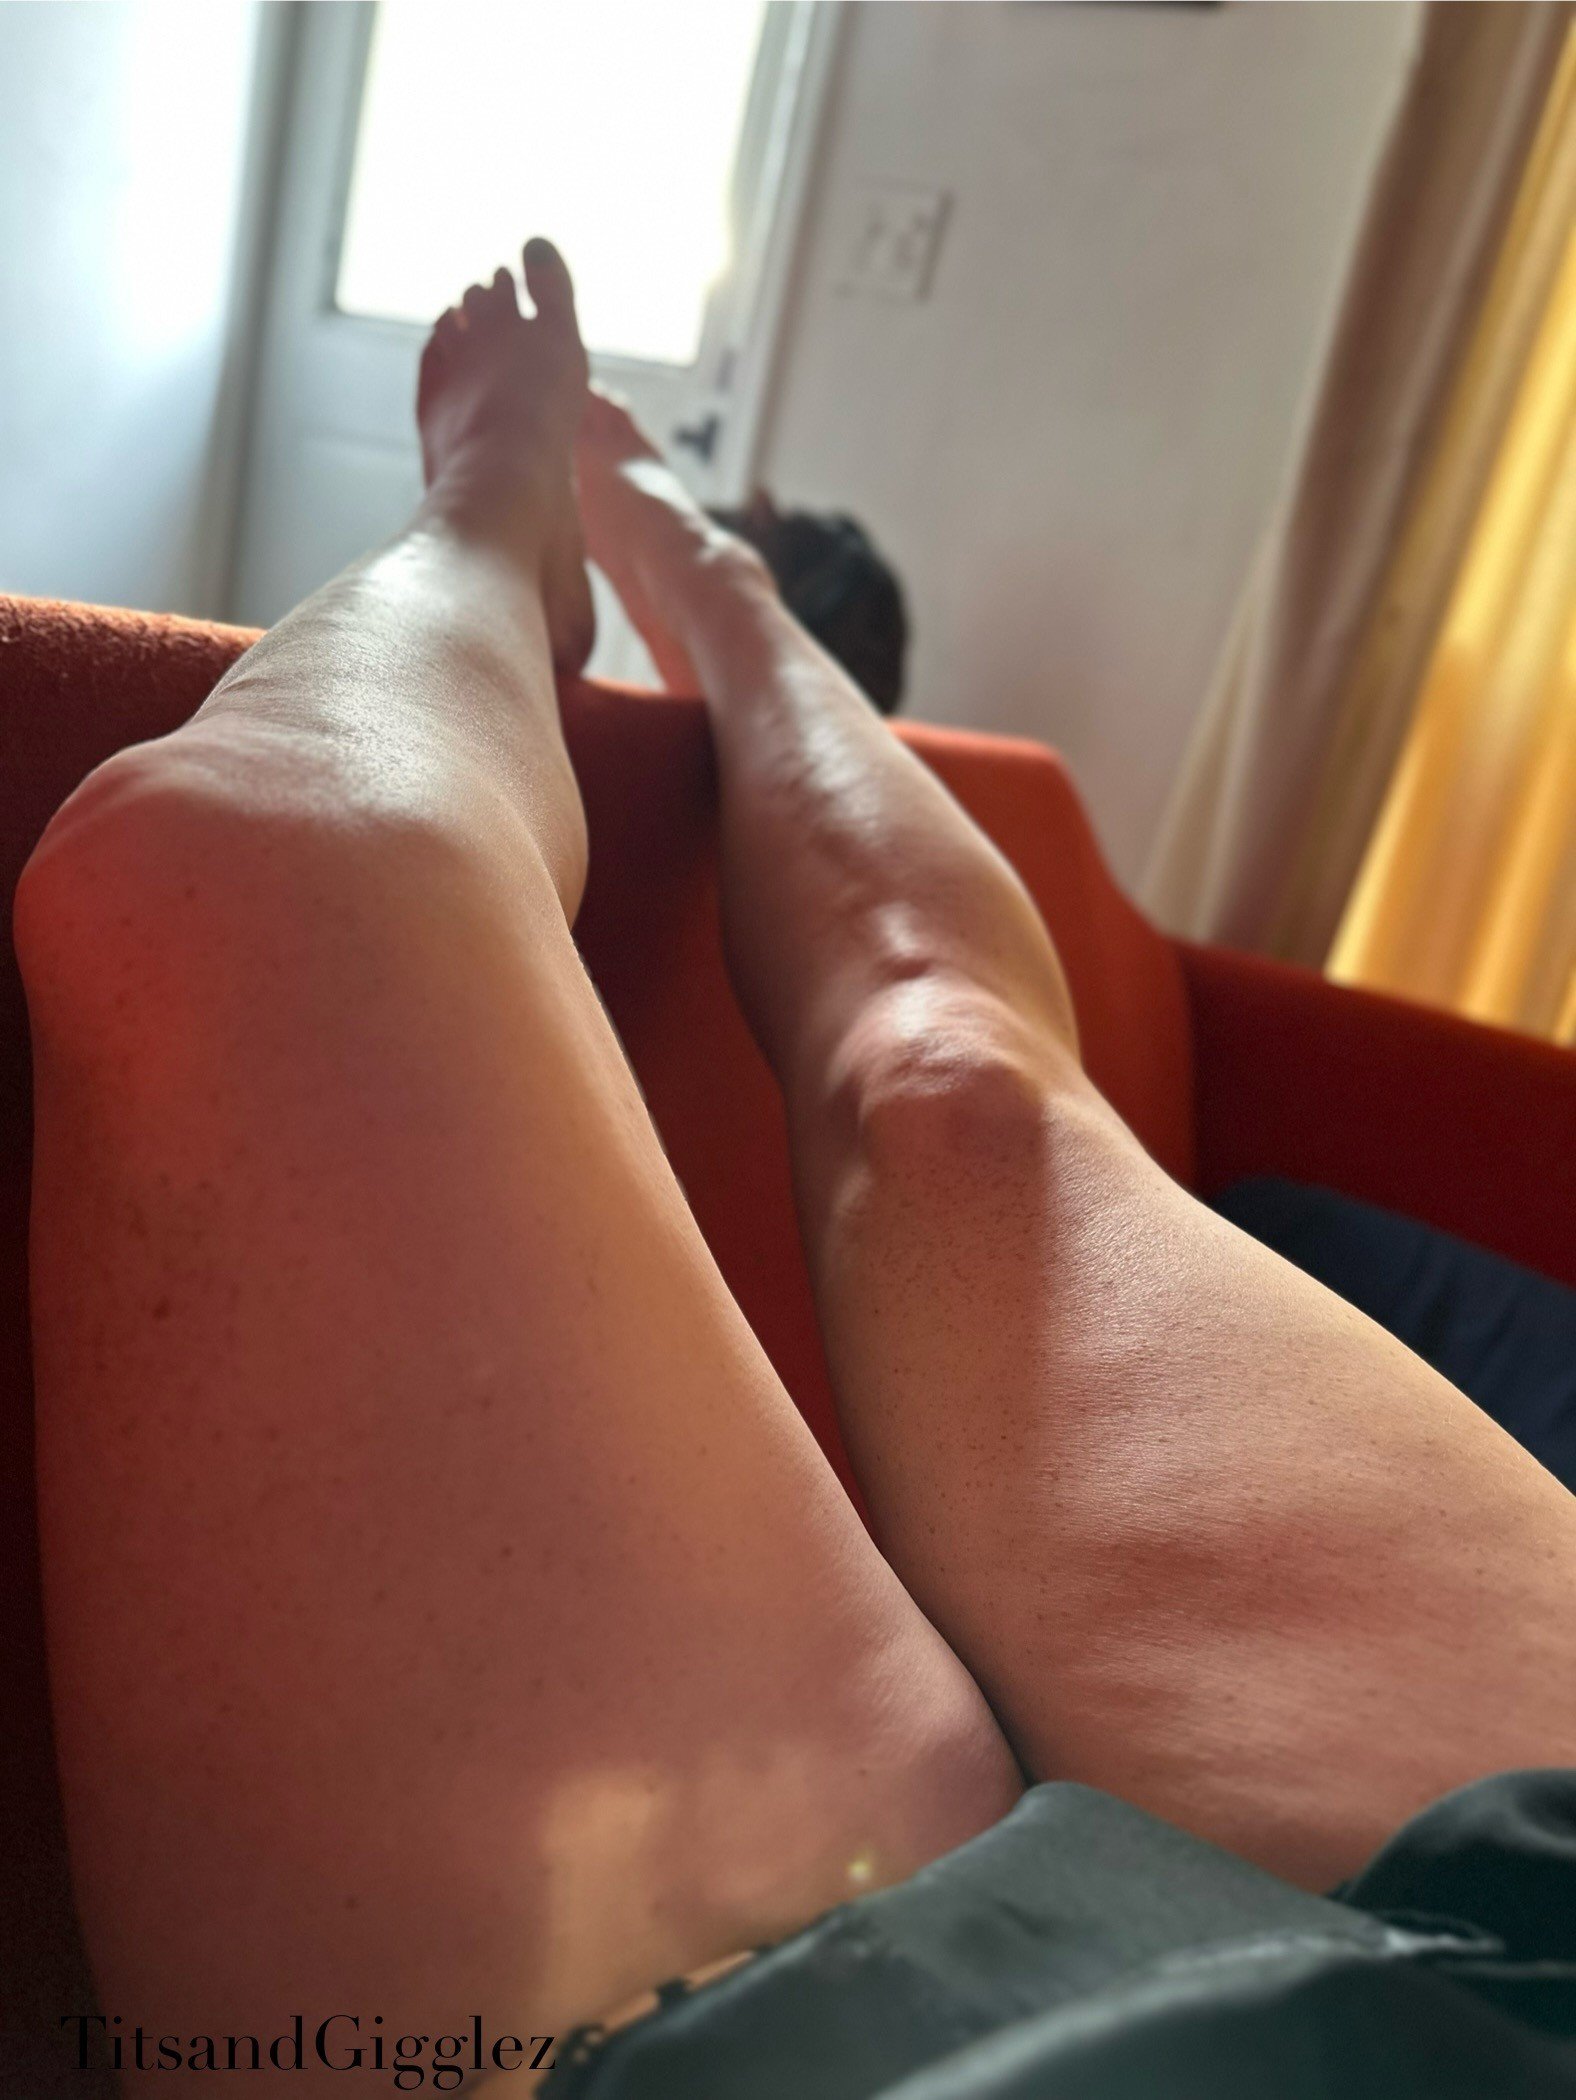 Watch the Photo by TitsAndGigglez with the username @TitsAndGigglez, who is a verified user, posted on February 28, 2024. The post is about the topic Sexy BBWs. and the text says 'good morning, sunshine ☀️💋 #bbw #tits #thighs #legs #feet'